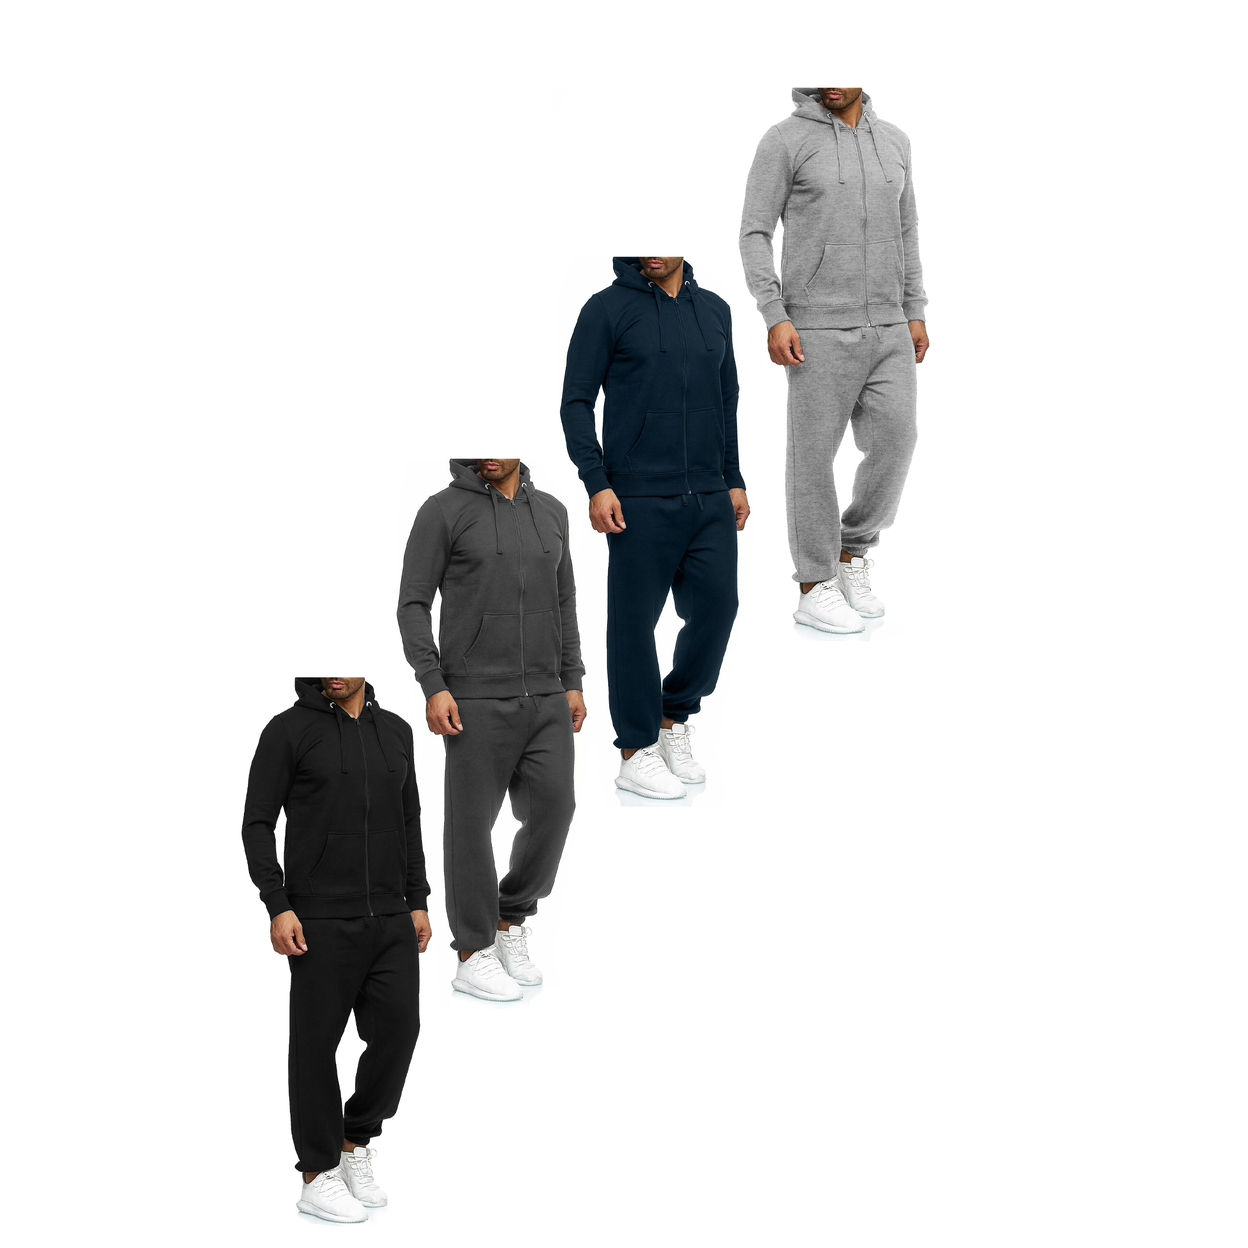 2-Pack: Men's Casual Big & Tall Athletic Active Winter Warm Fleece Lined Full Zip Tracksuit Jogger Set - Charcoal, Large